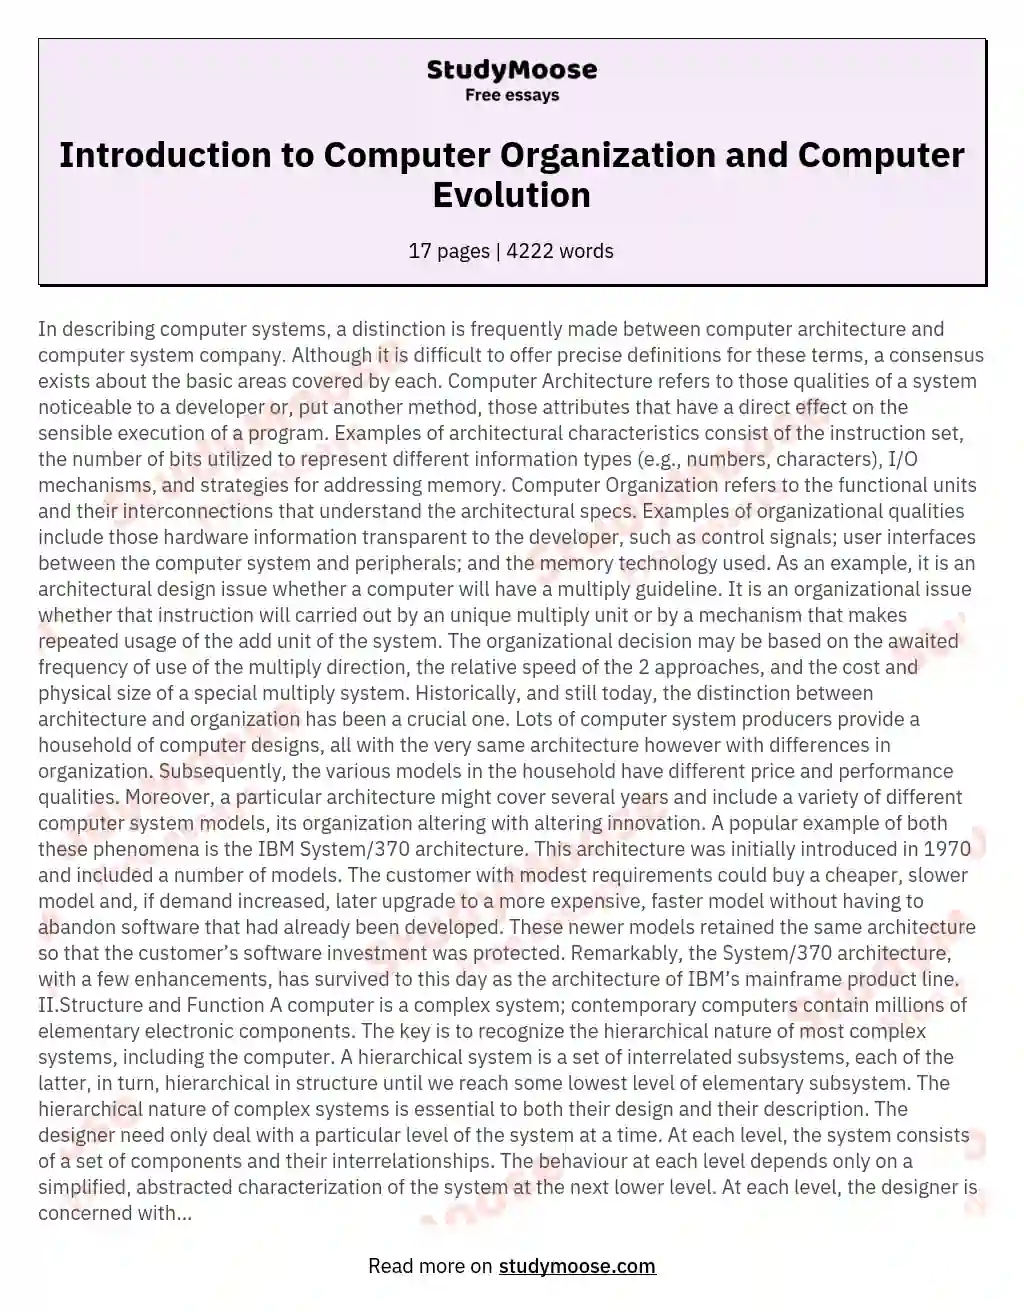 Introduction to Computer Organization and Computer Evolution essay